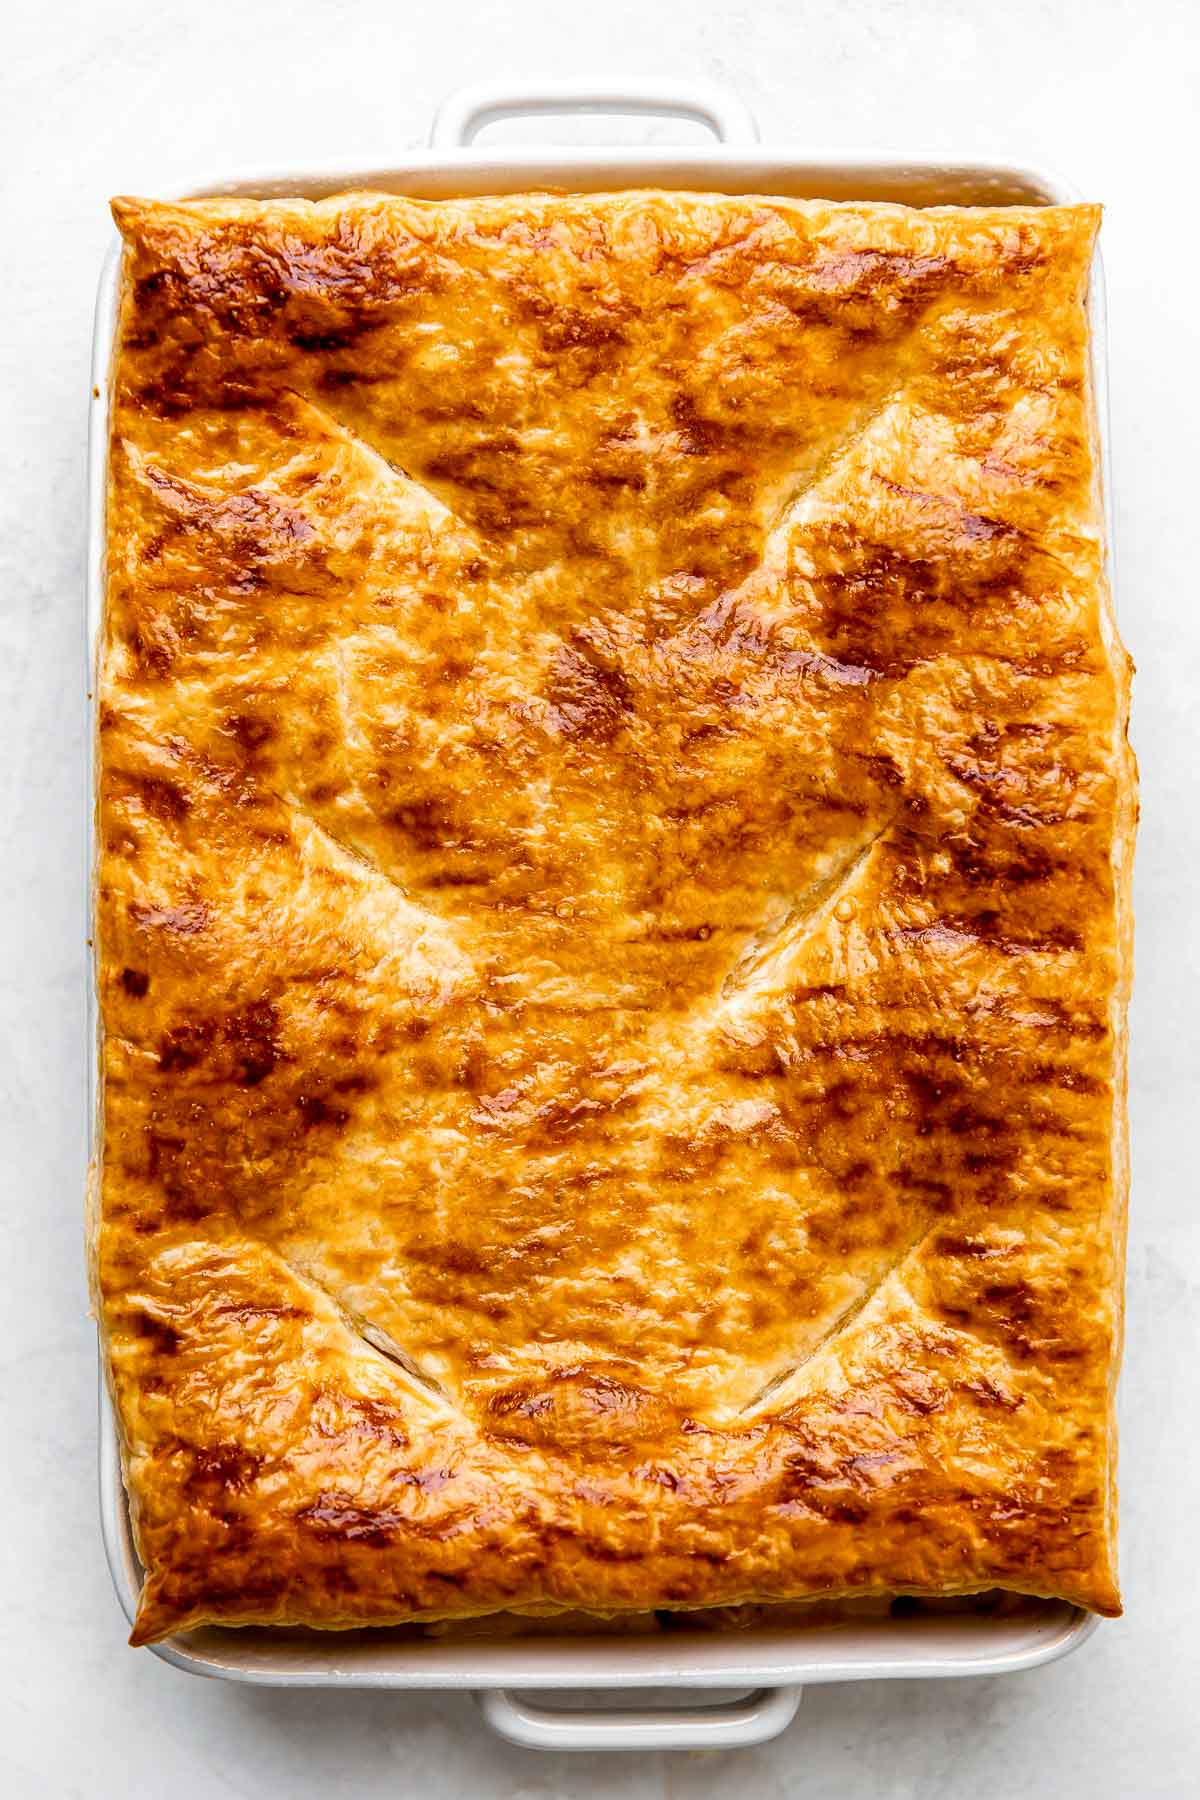 A par-baked sheet of puff pastry is placed overtop of an assembled seafood pot pie inside of a large white baking dish. The baking dish sits atop of a creamy white textured surface.